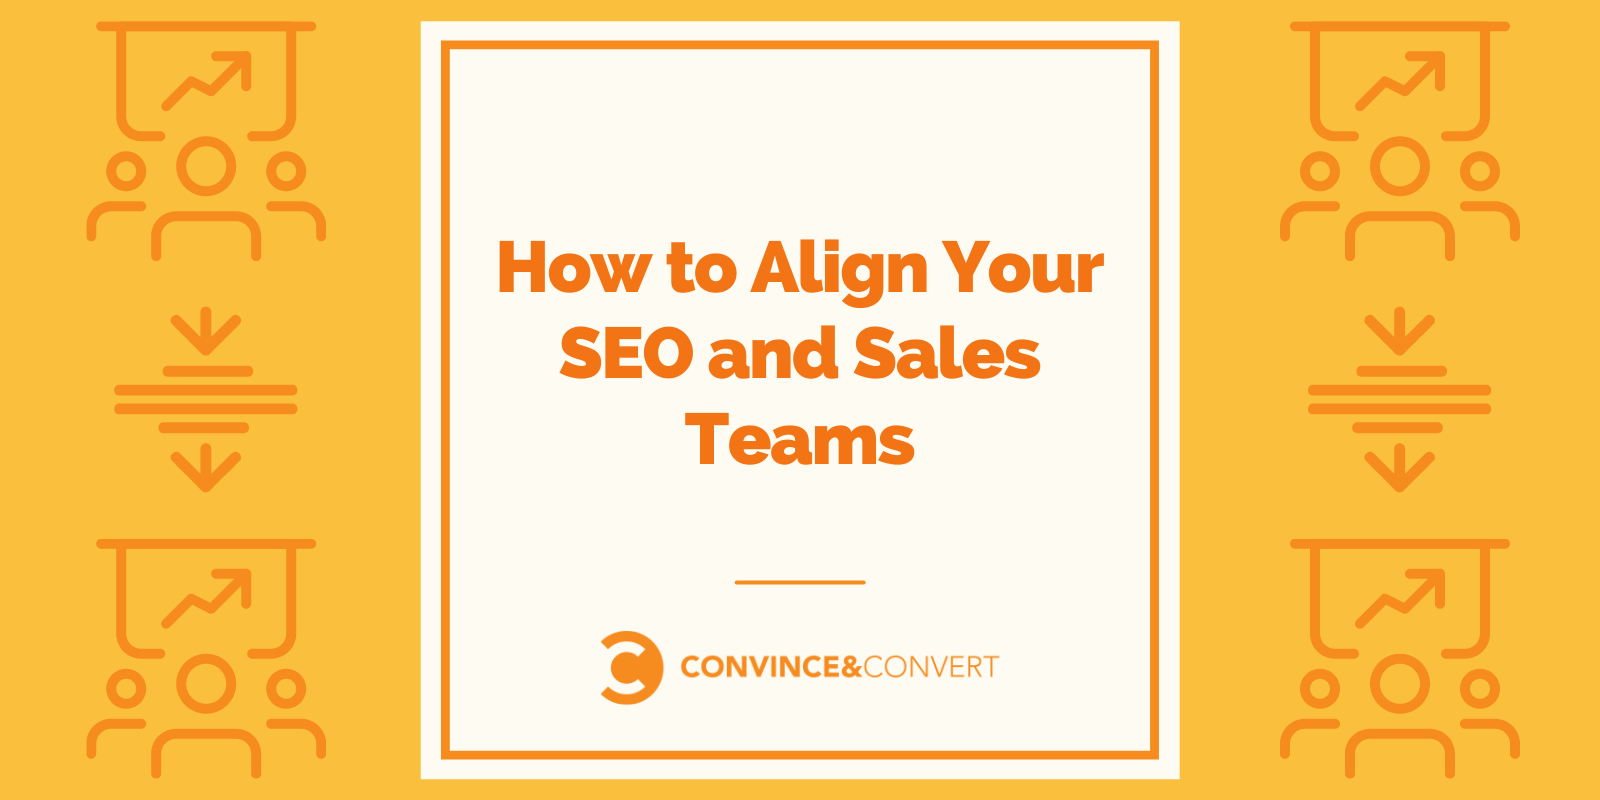 How to Align Your SEO and Sales Groups